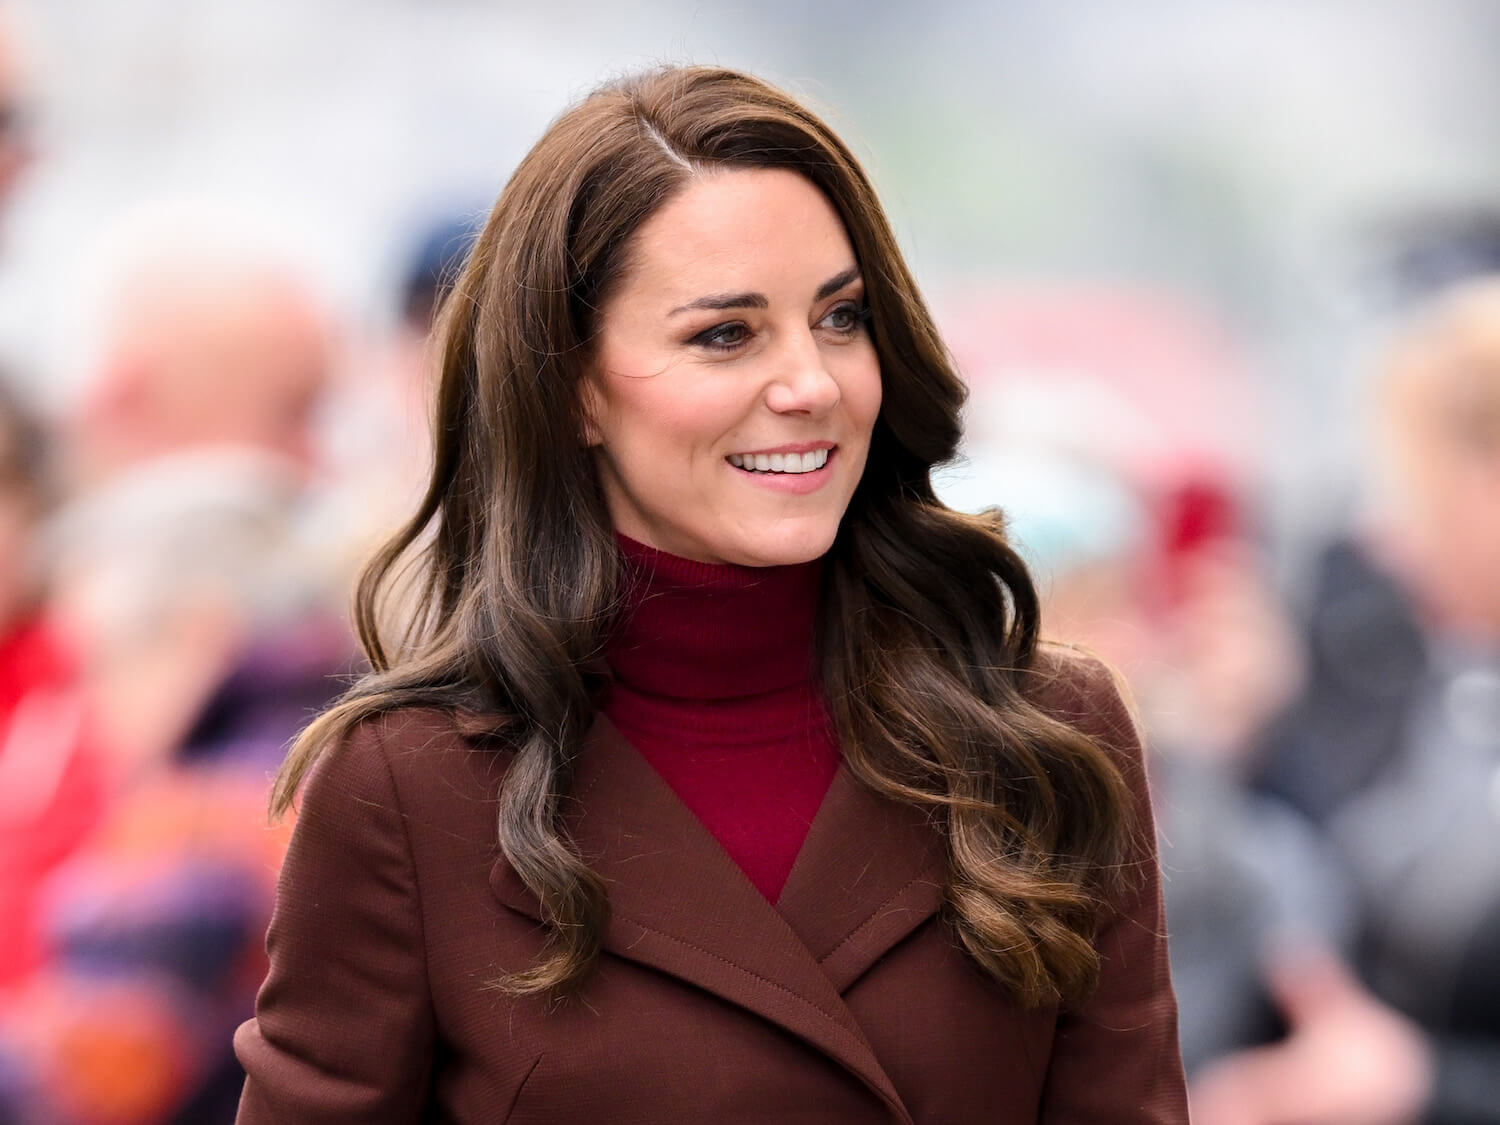 These 3 Relatable Kate Middleton Moments Prove She’s Just Like All Moms